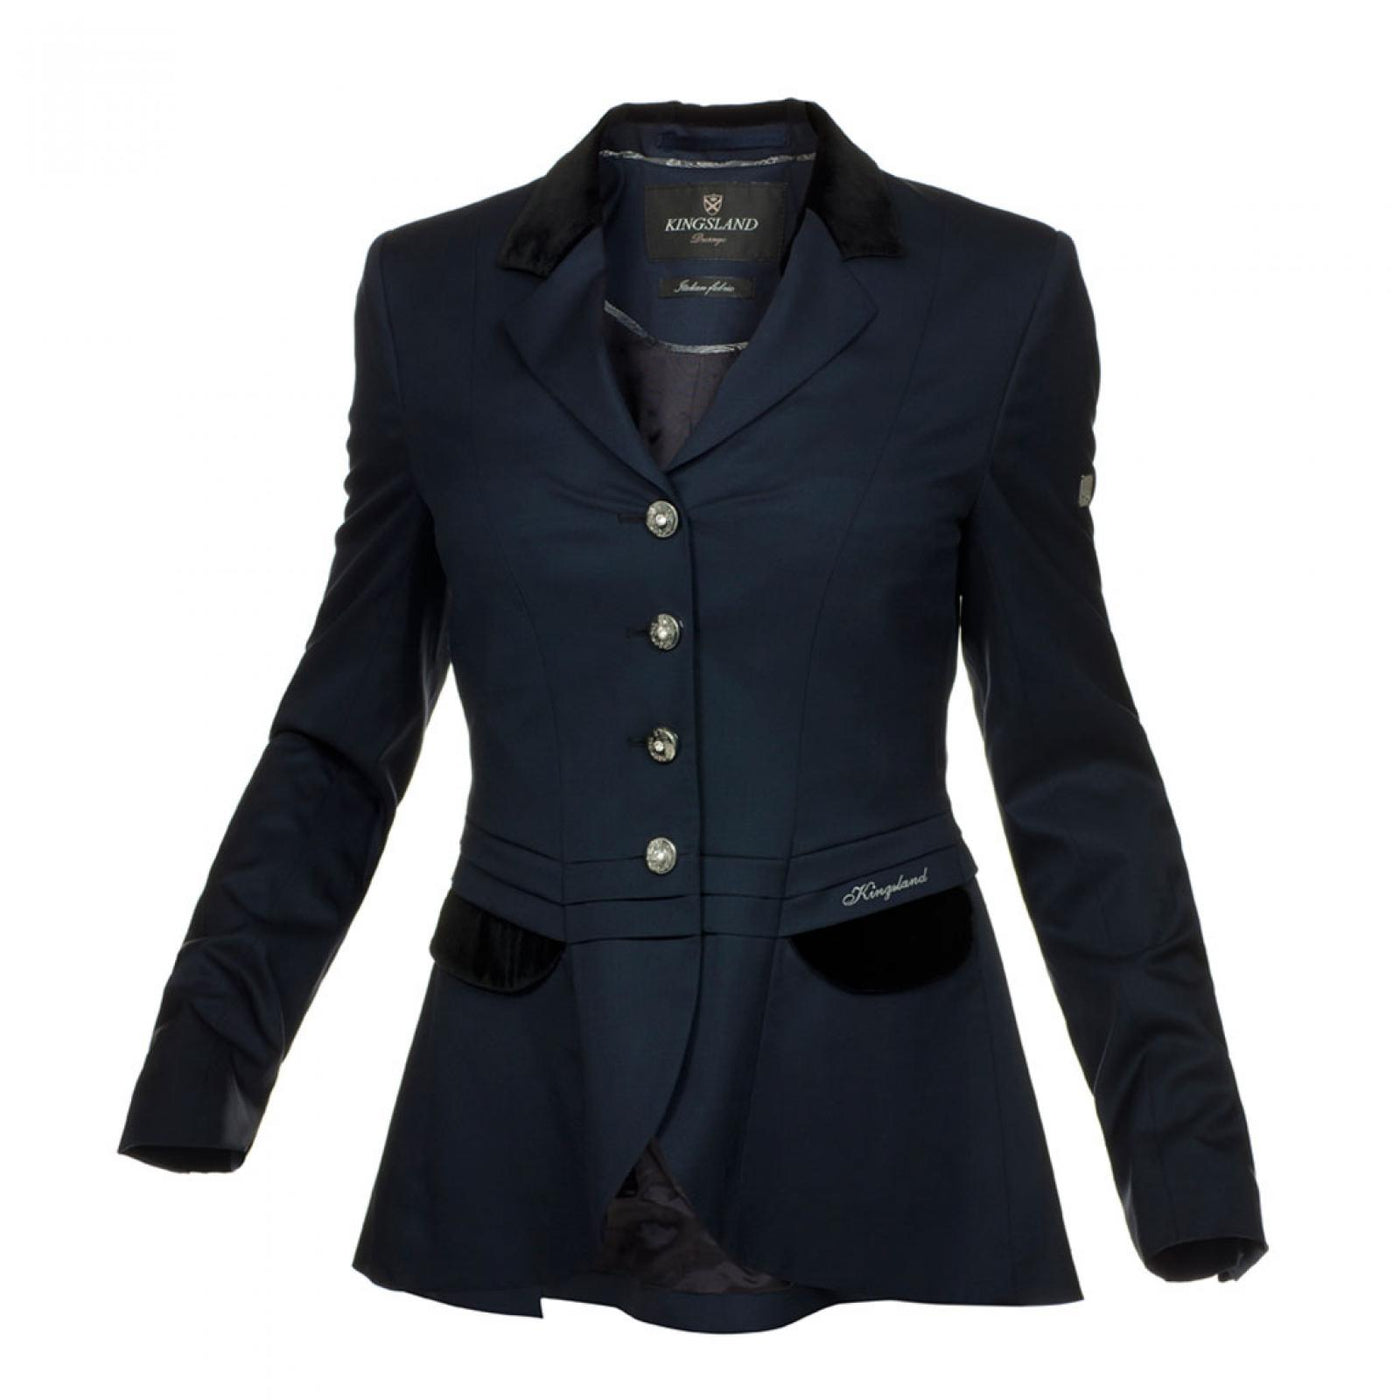 Ladies Riding Jacket - OUTLET